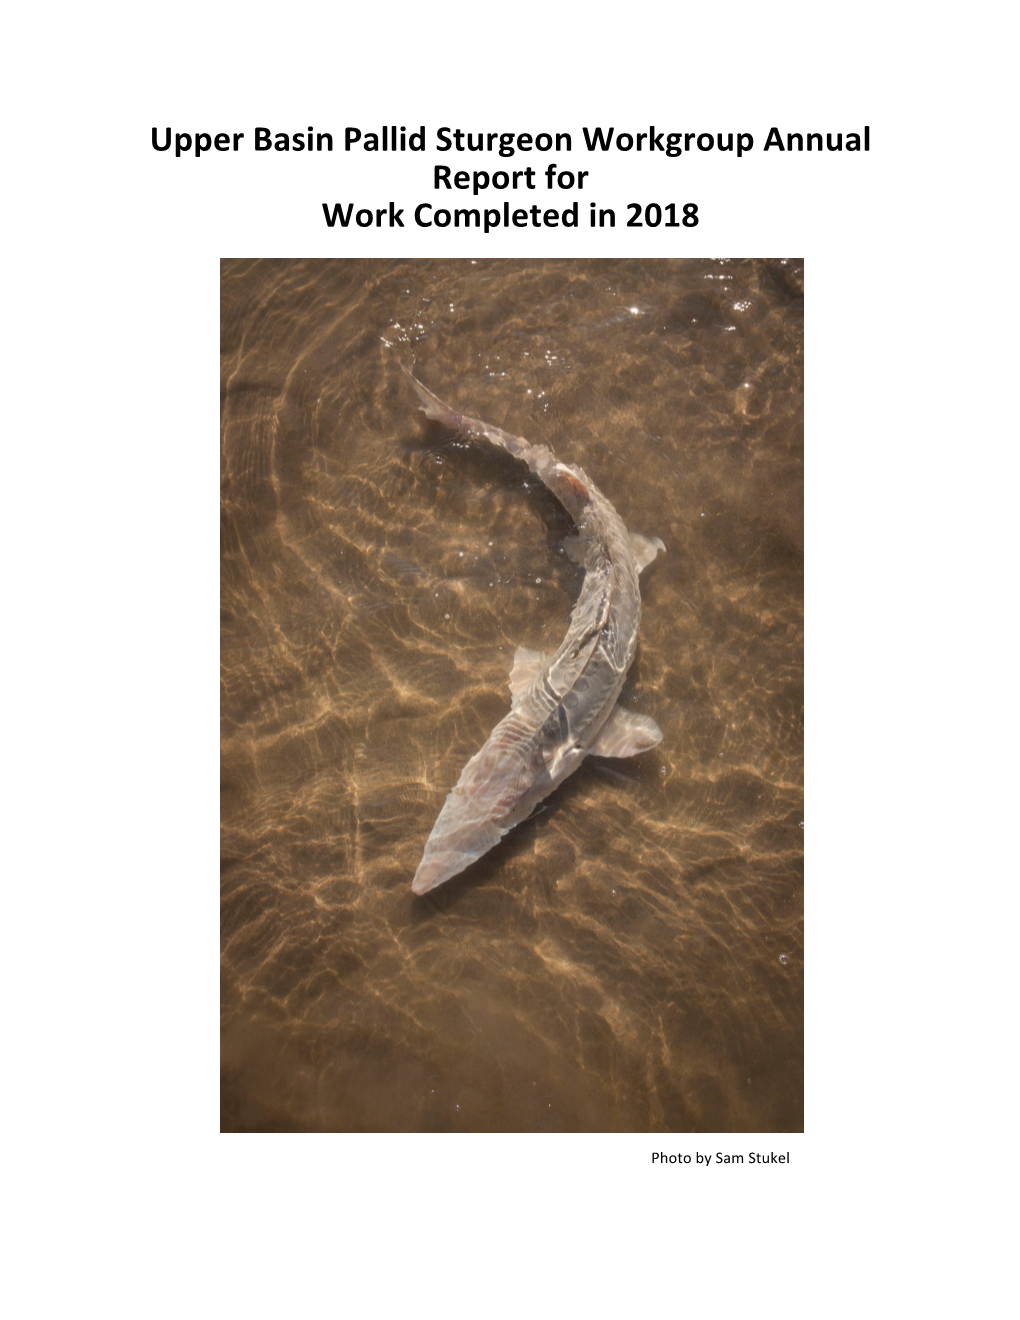 Upper Basin Pallid Sturgeon Workgroup Annual Report for Work Completed in 2018